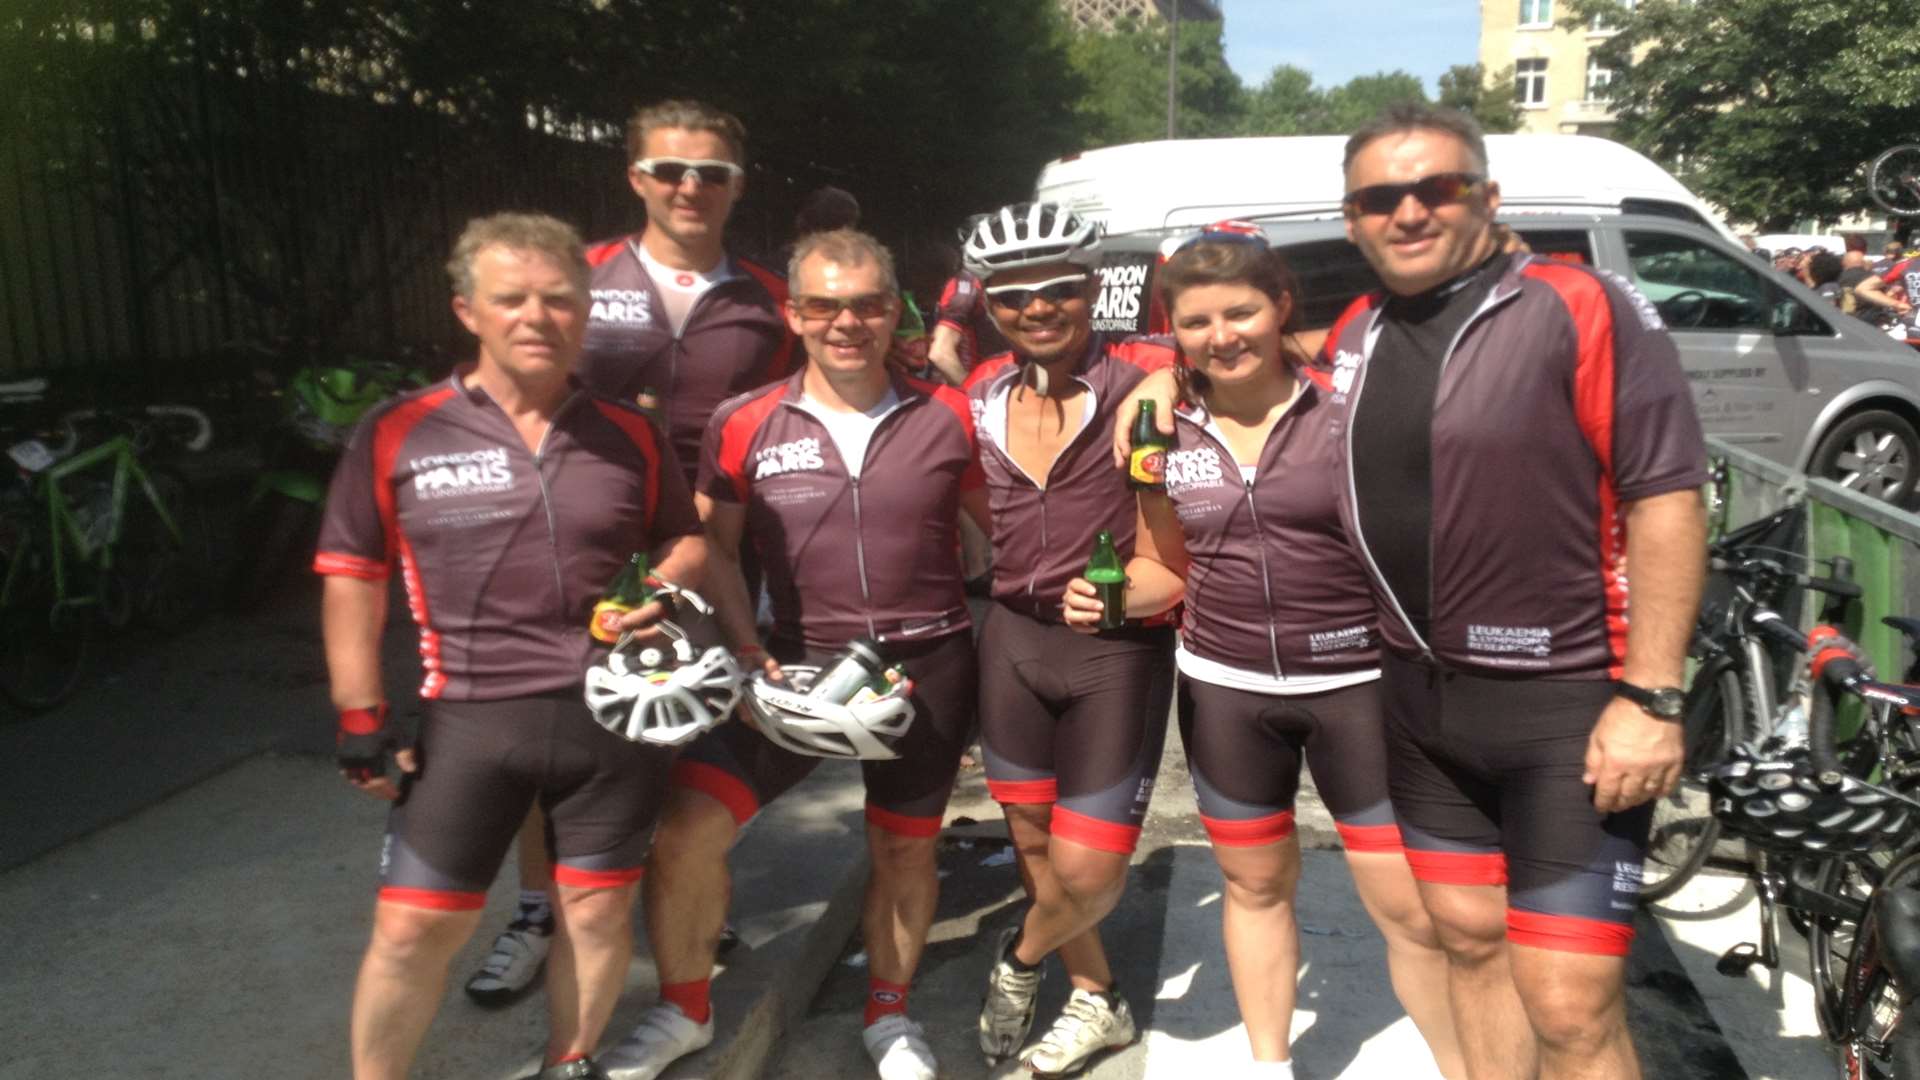 Paul Hitchcott (far left) cycled 500km from London to Paris in four days